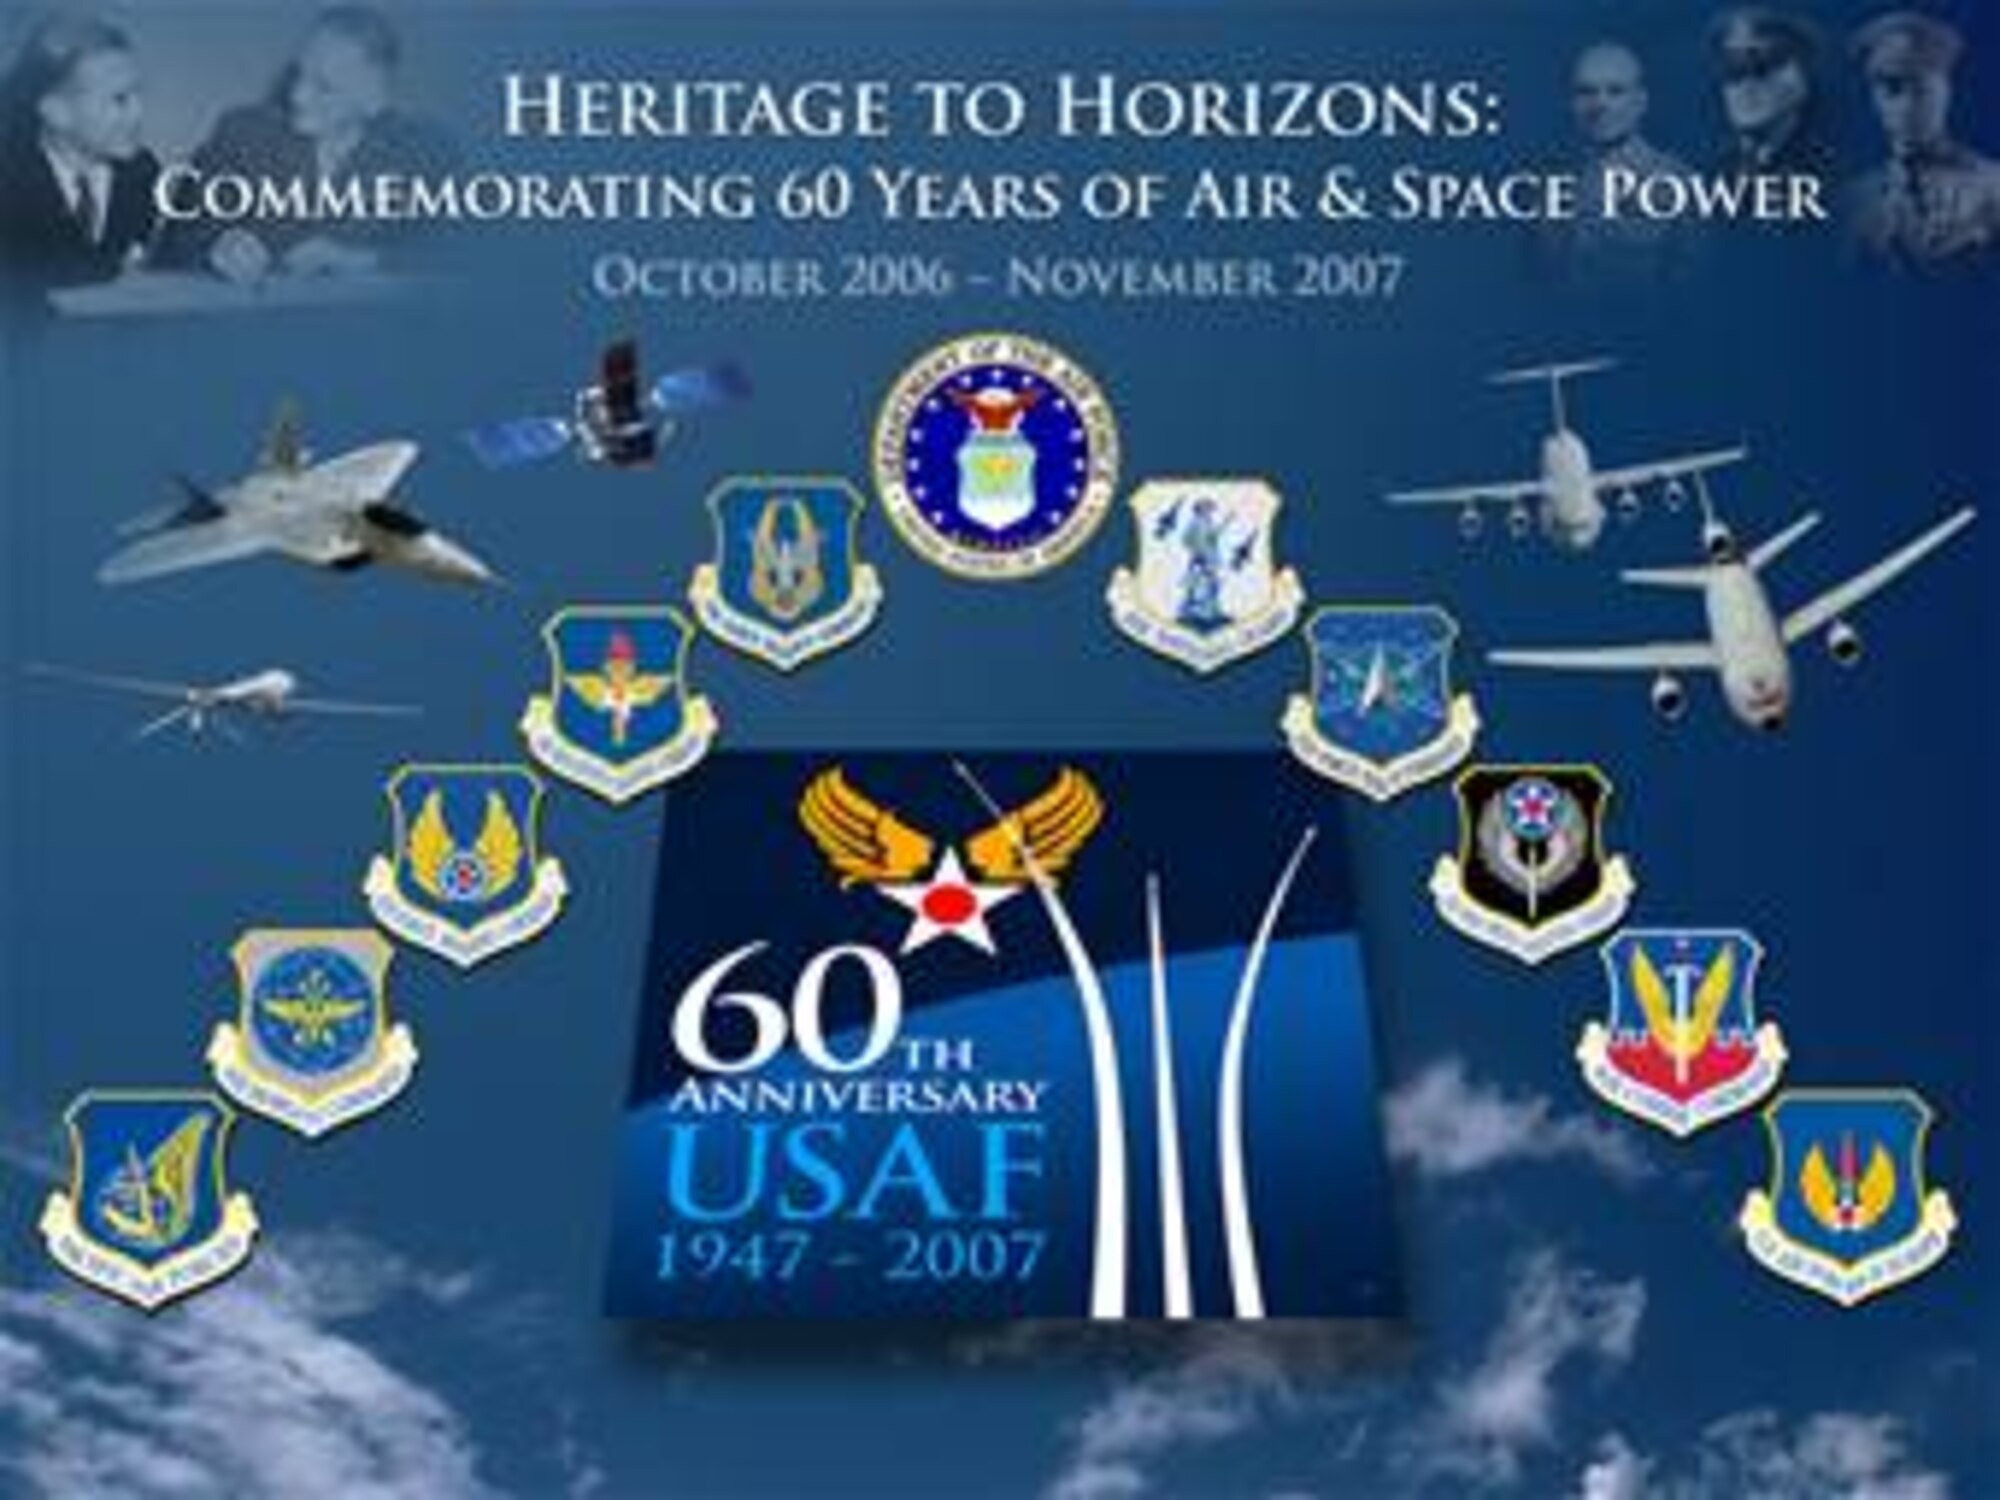 60th AnniversaryPoster #13.  Image is 10x7.5 inches @ 120 ppi.  Air Force Link does not provide printed posters but assistance can be provided in acquiring posters through your servicing DAPS. A PDF version for printing on office printers is also available. Requests can be made to afgraphics@dma.mil. Please specify the title and number.